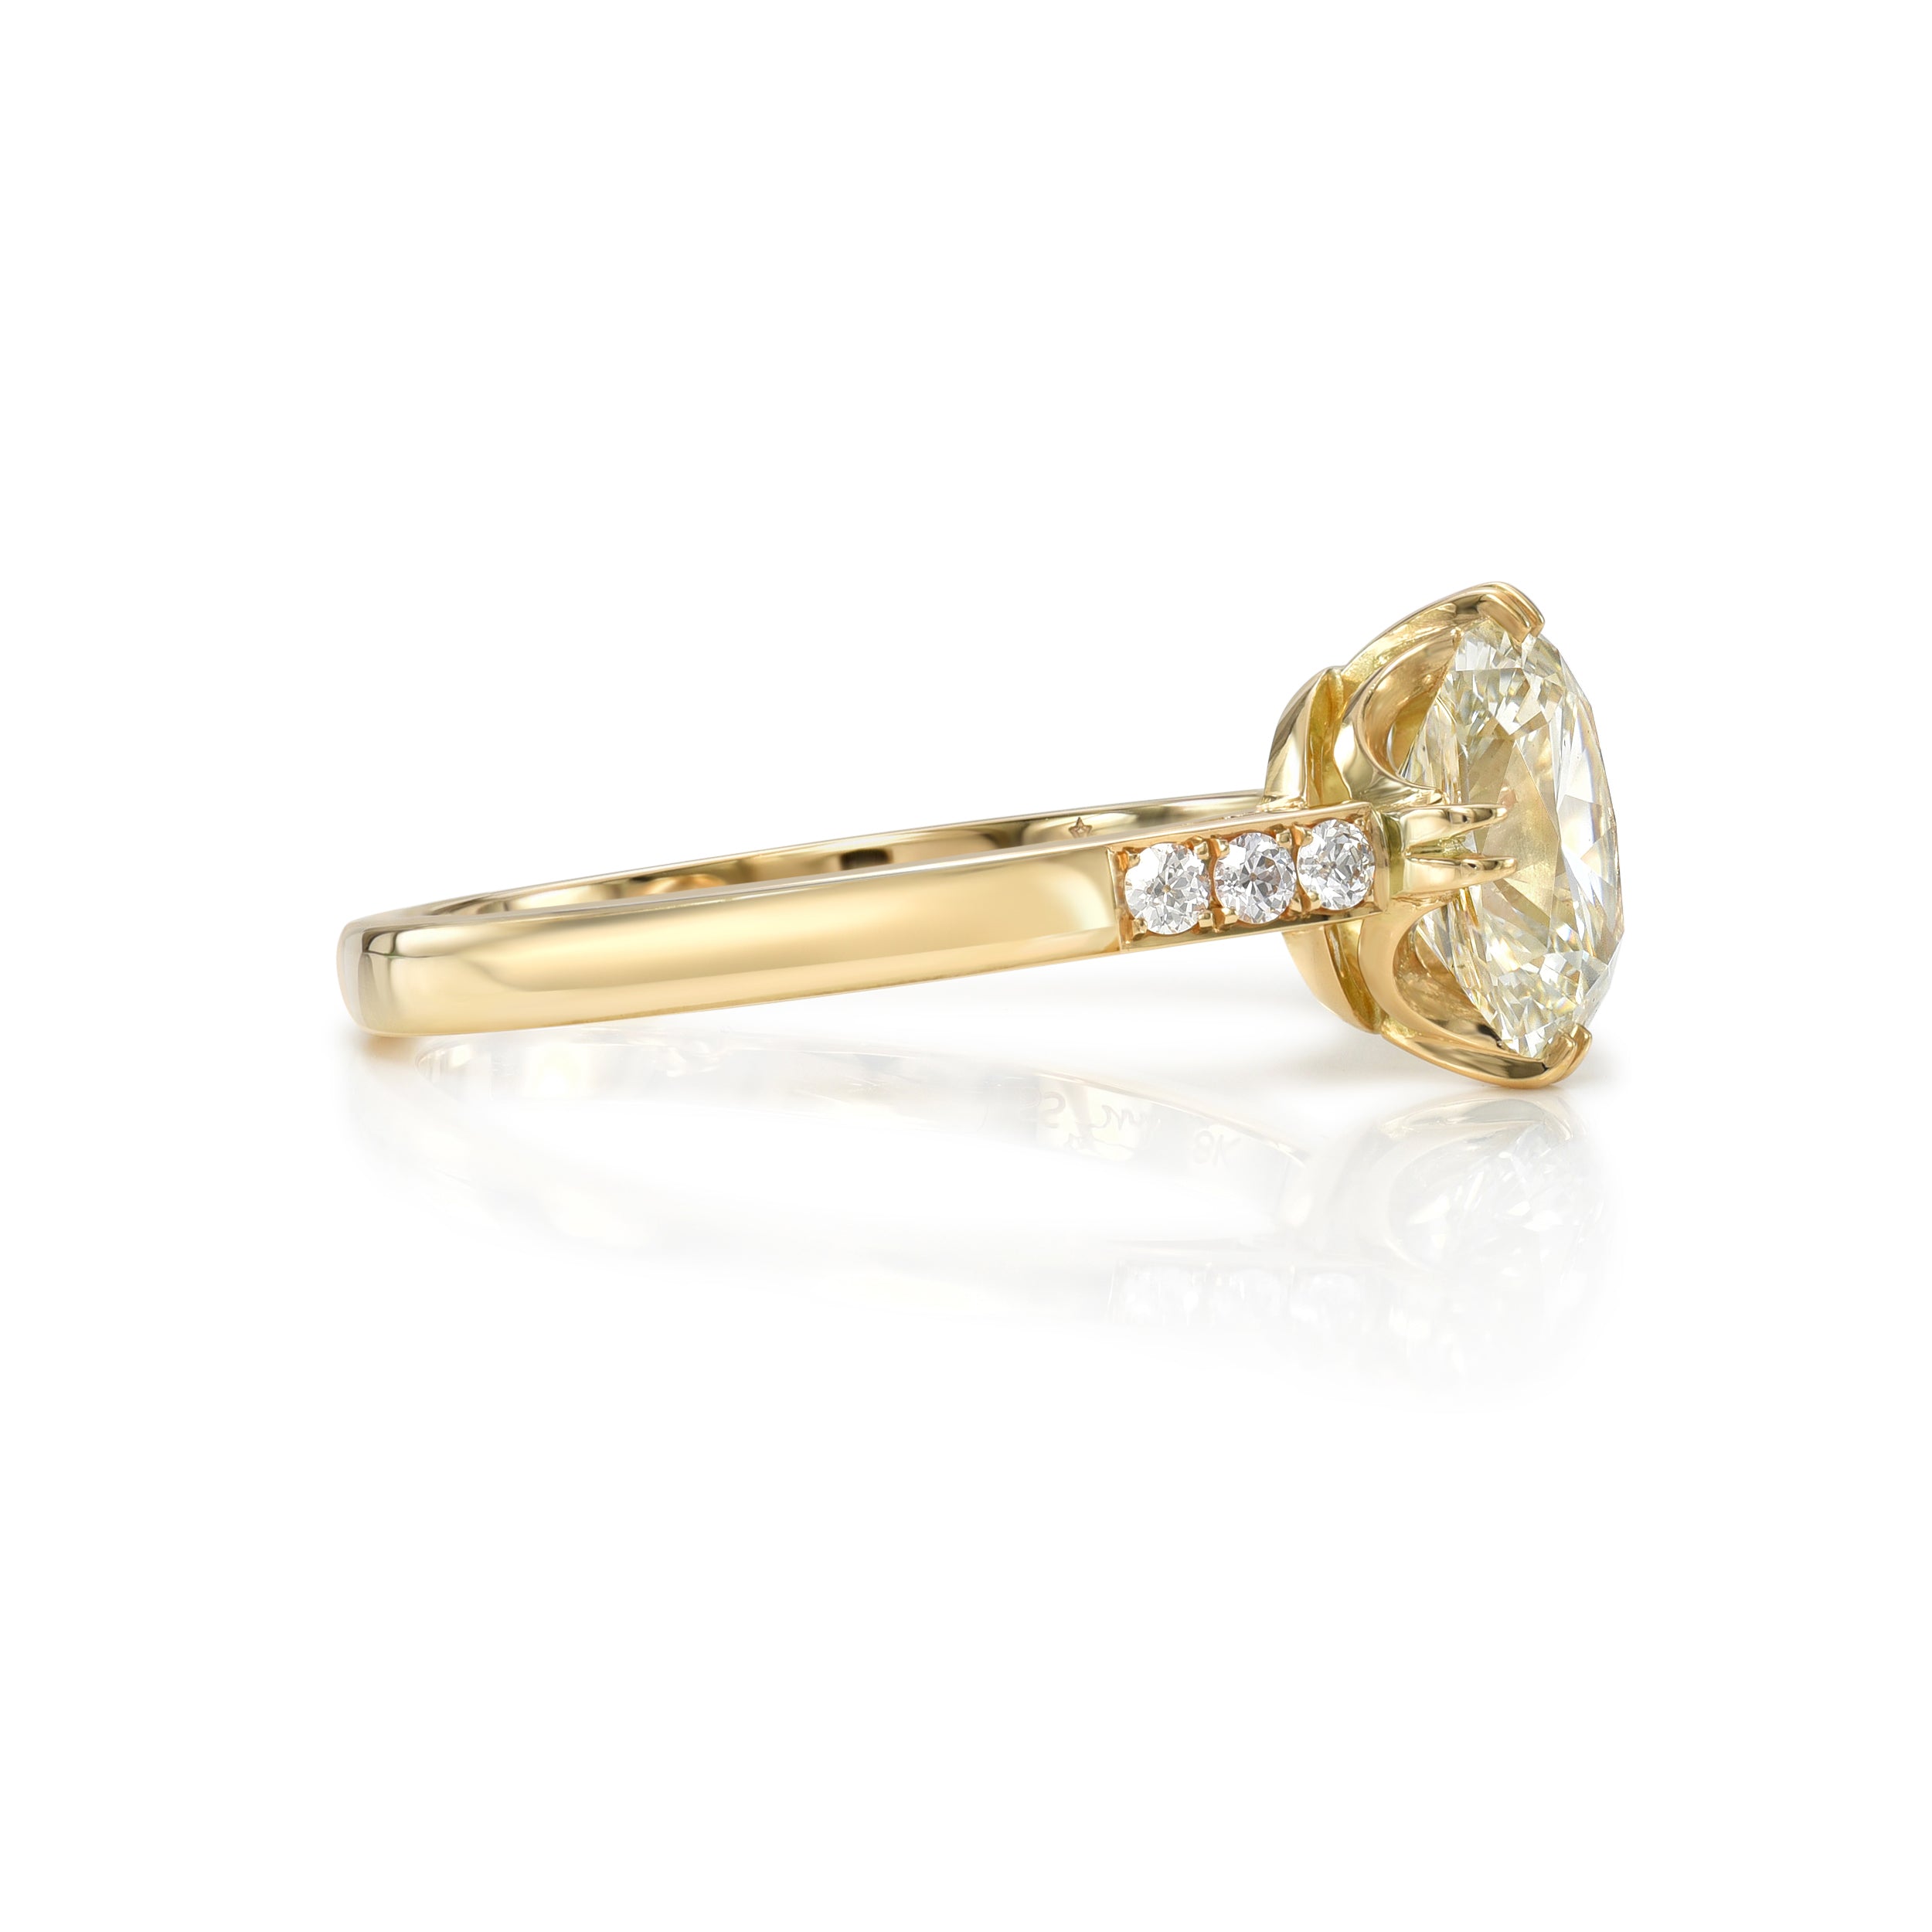 SINGLE STONE BAUER RING featuring 1.38ct L/VS2 GIA certified antique cushion cut diamond with 0.09ctw old European cut accent diamonds prong set in a handcrafted 18K yellow gold mounting.